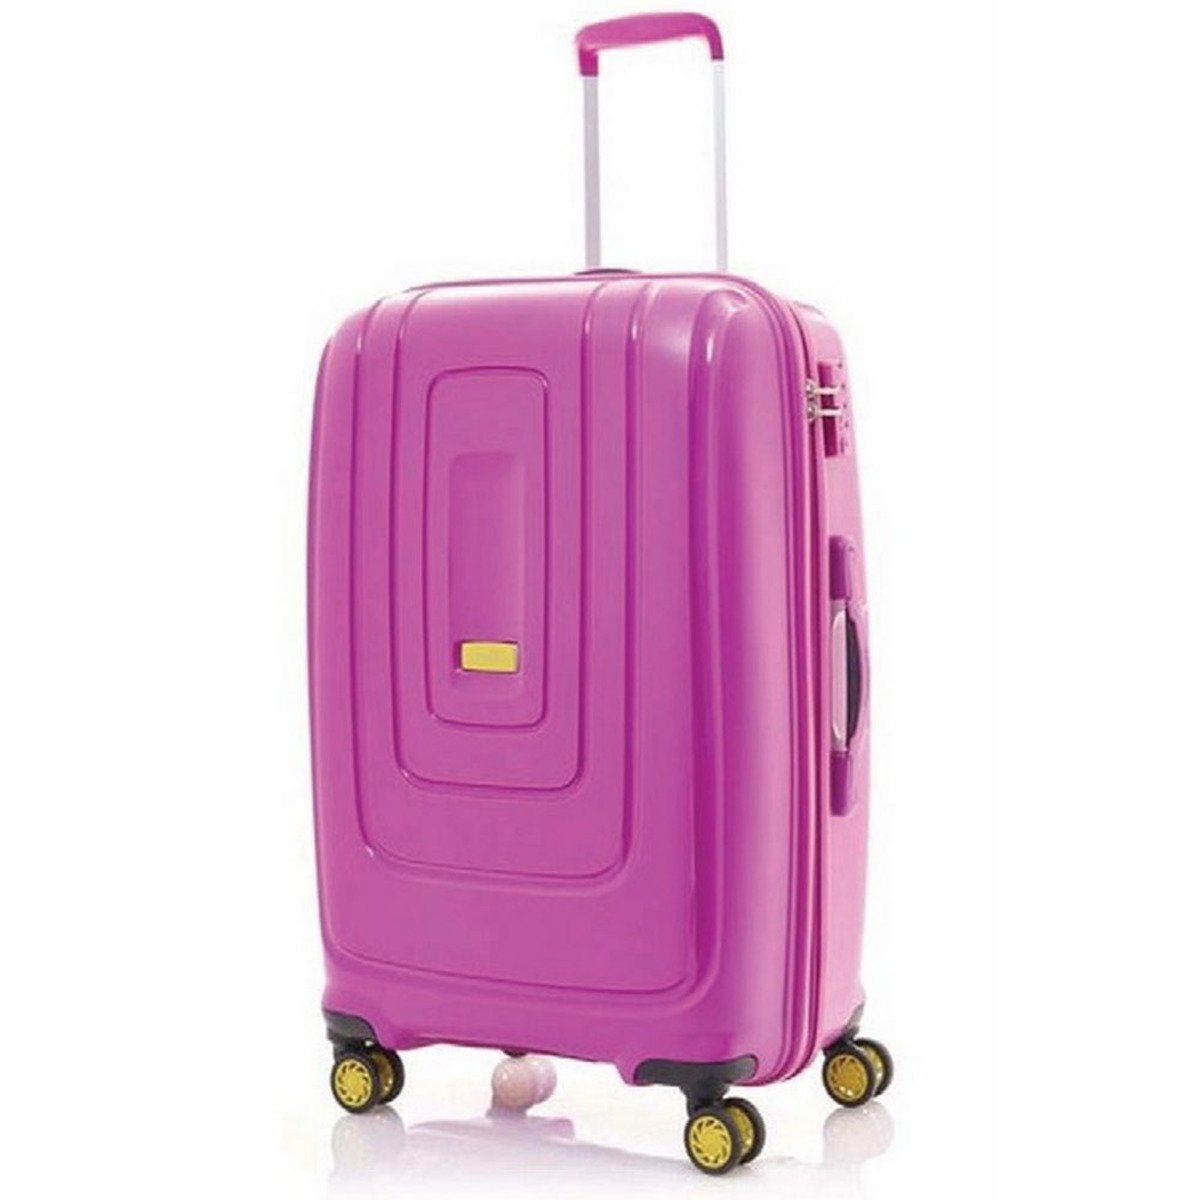 American Tourister Lightrax 4Wheel Hard Trolley 69cm Assorted Colors